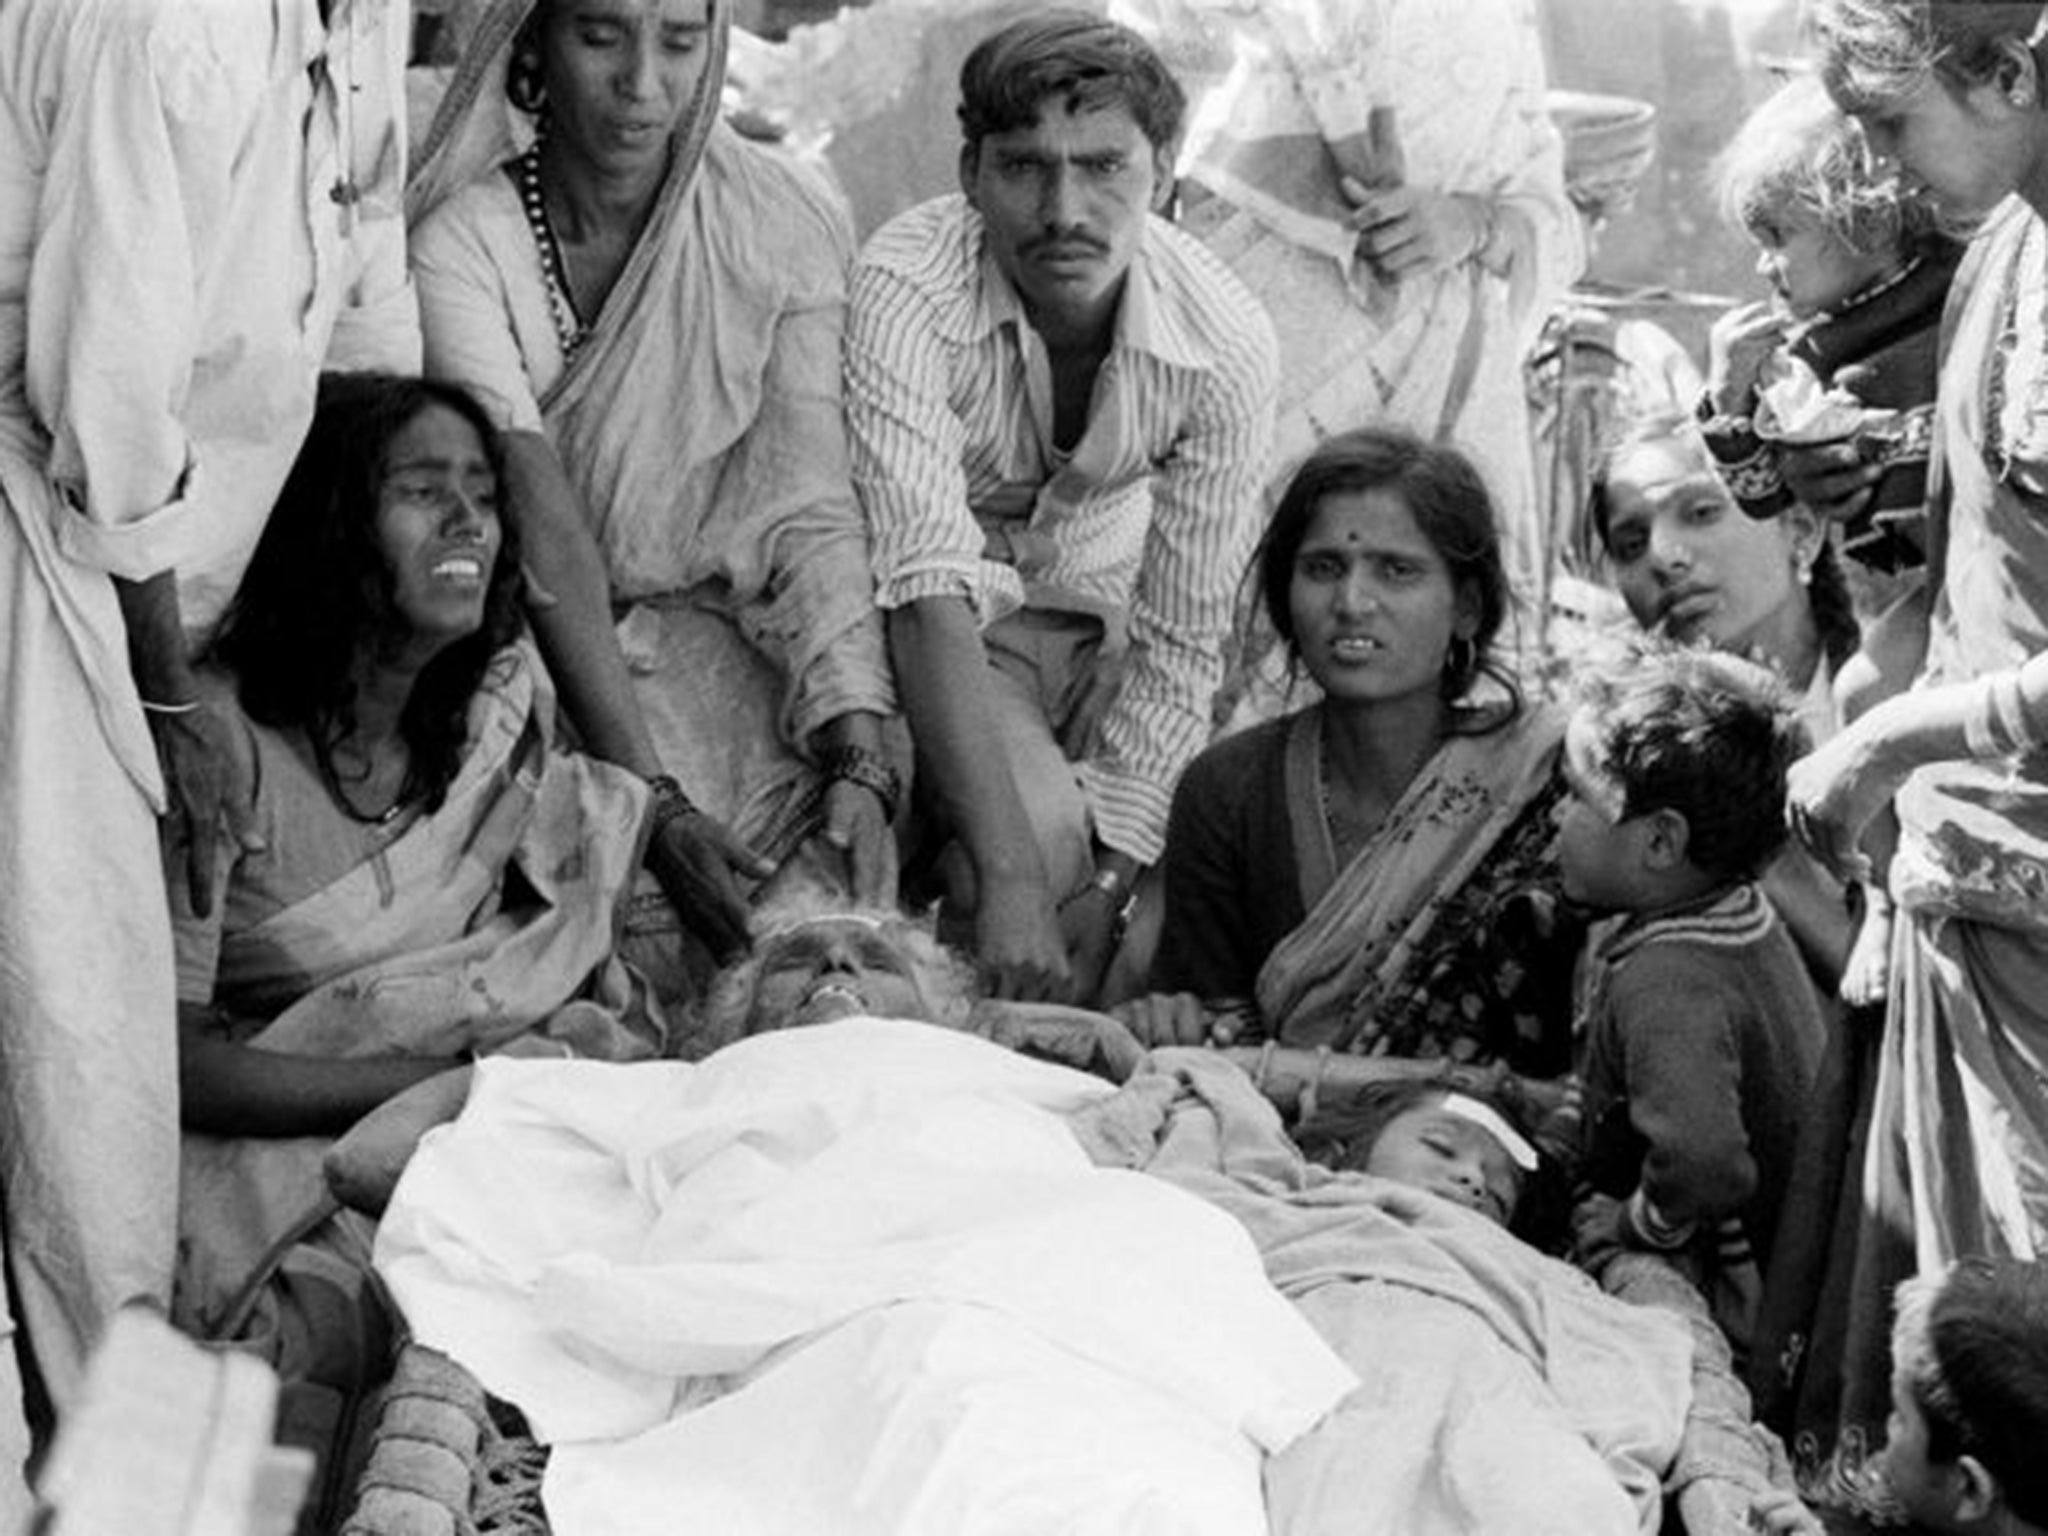 The explosion at the Union Carbide pesticide factory in Bhopal killed 8,000 within a week and injured tens of thousands living in the slums near the plant